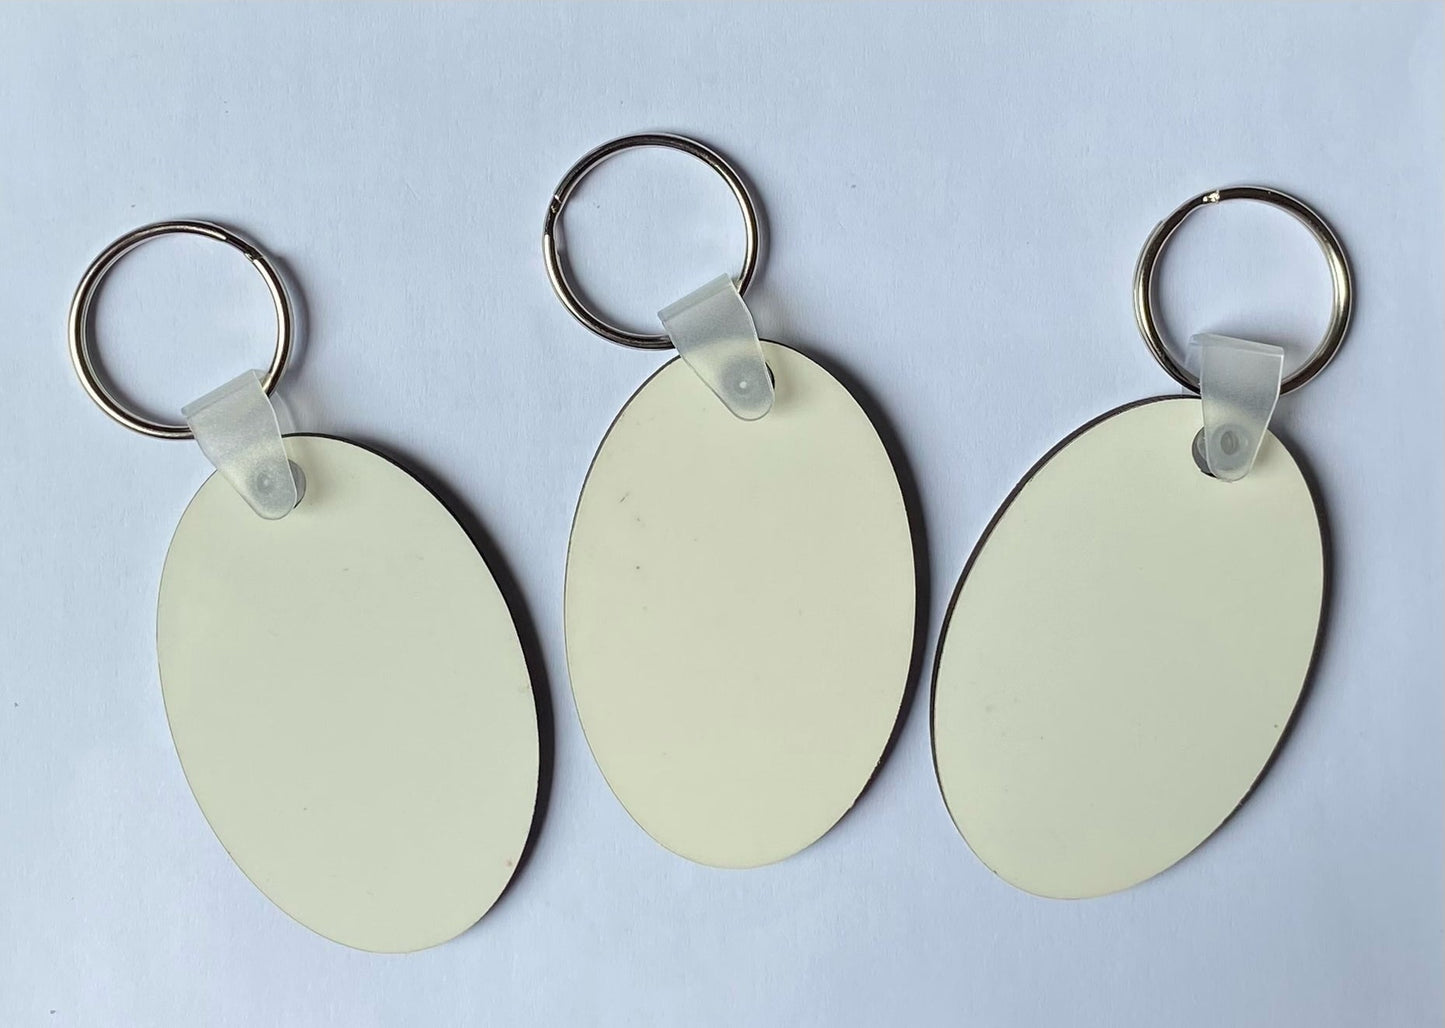 25 x Blank Sublimation MDF Keyrings 6cm x 4cm Double Sided Oval